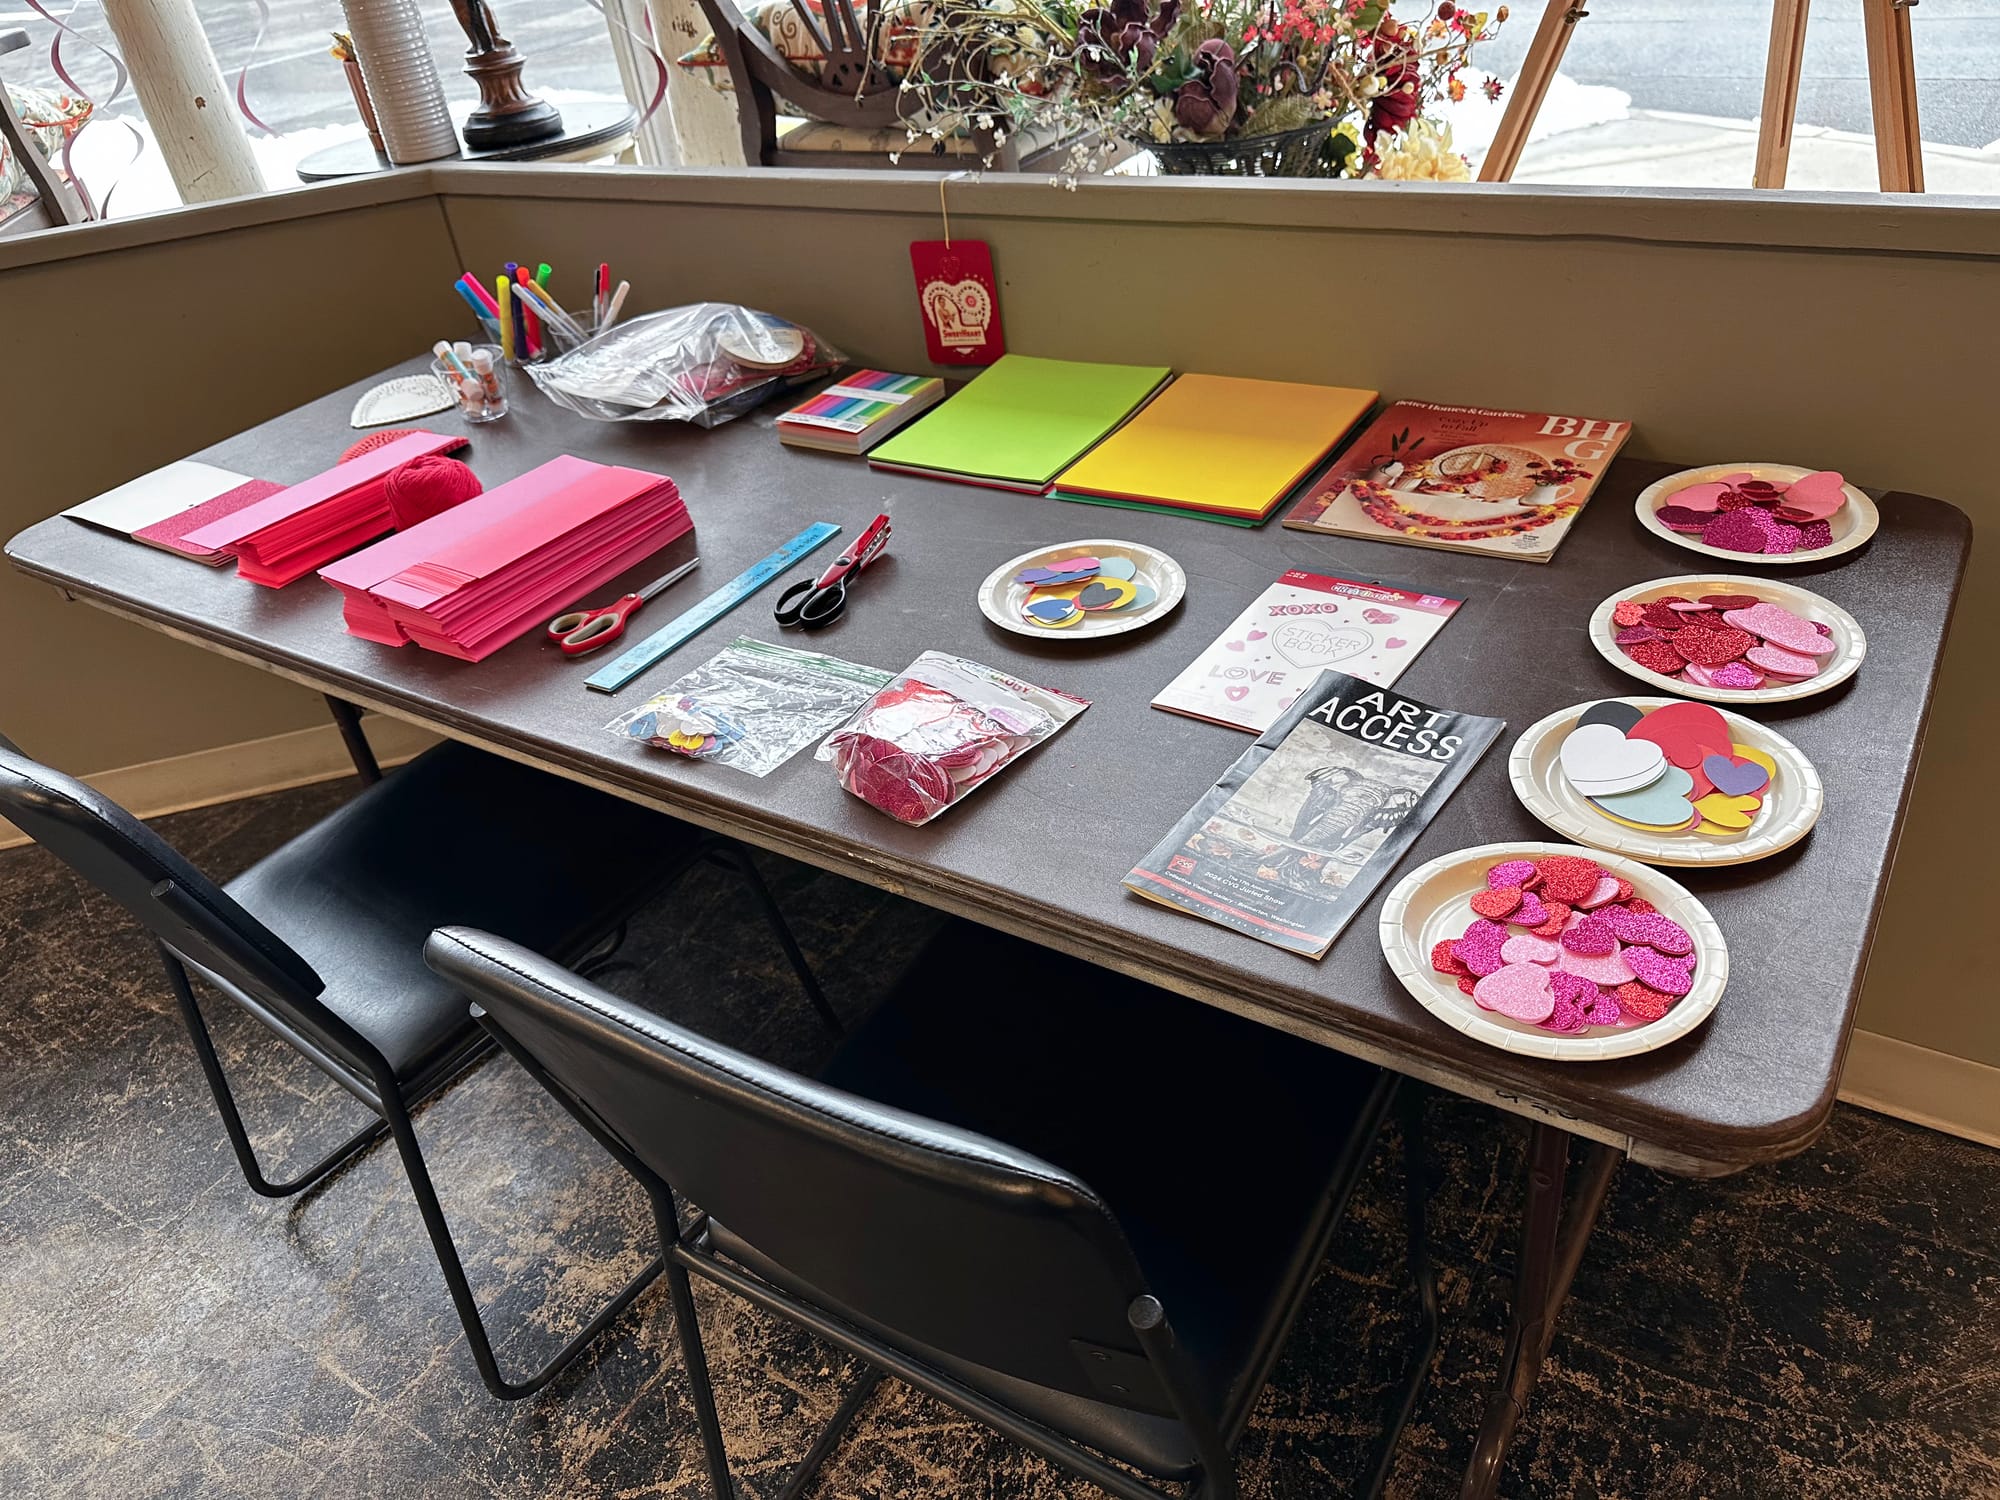 A table with brightly colored materials for making valentines